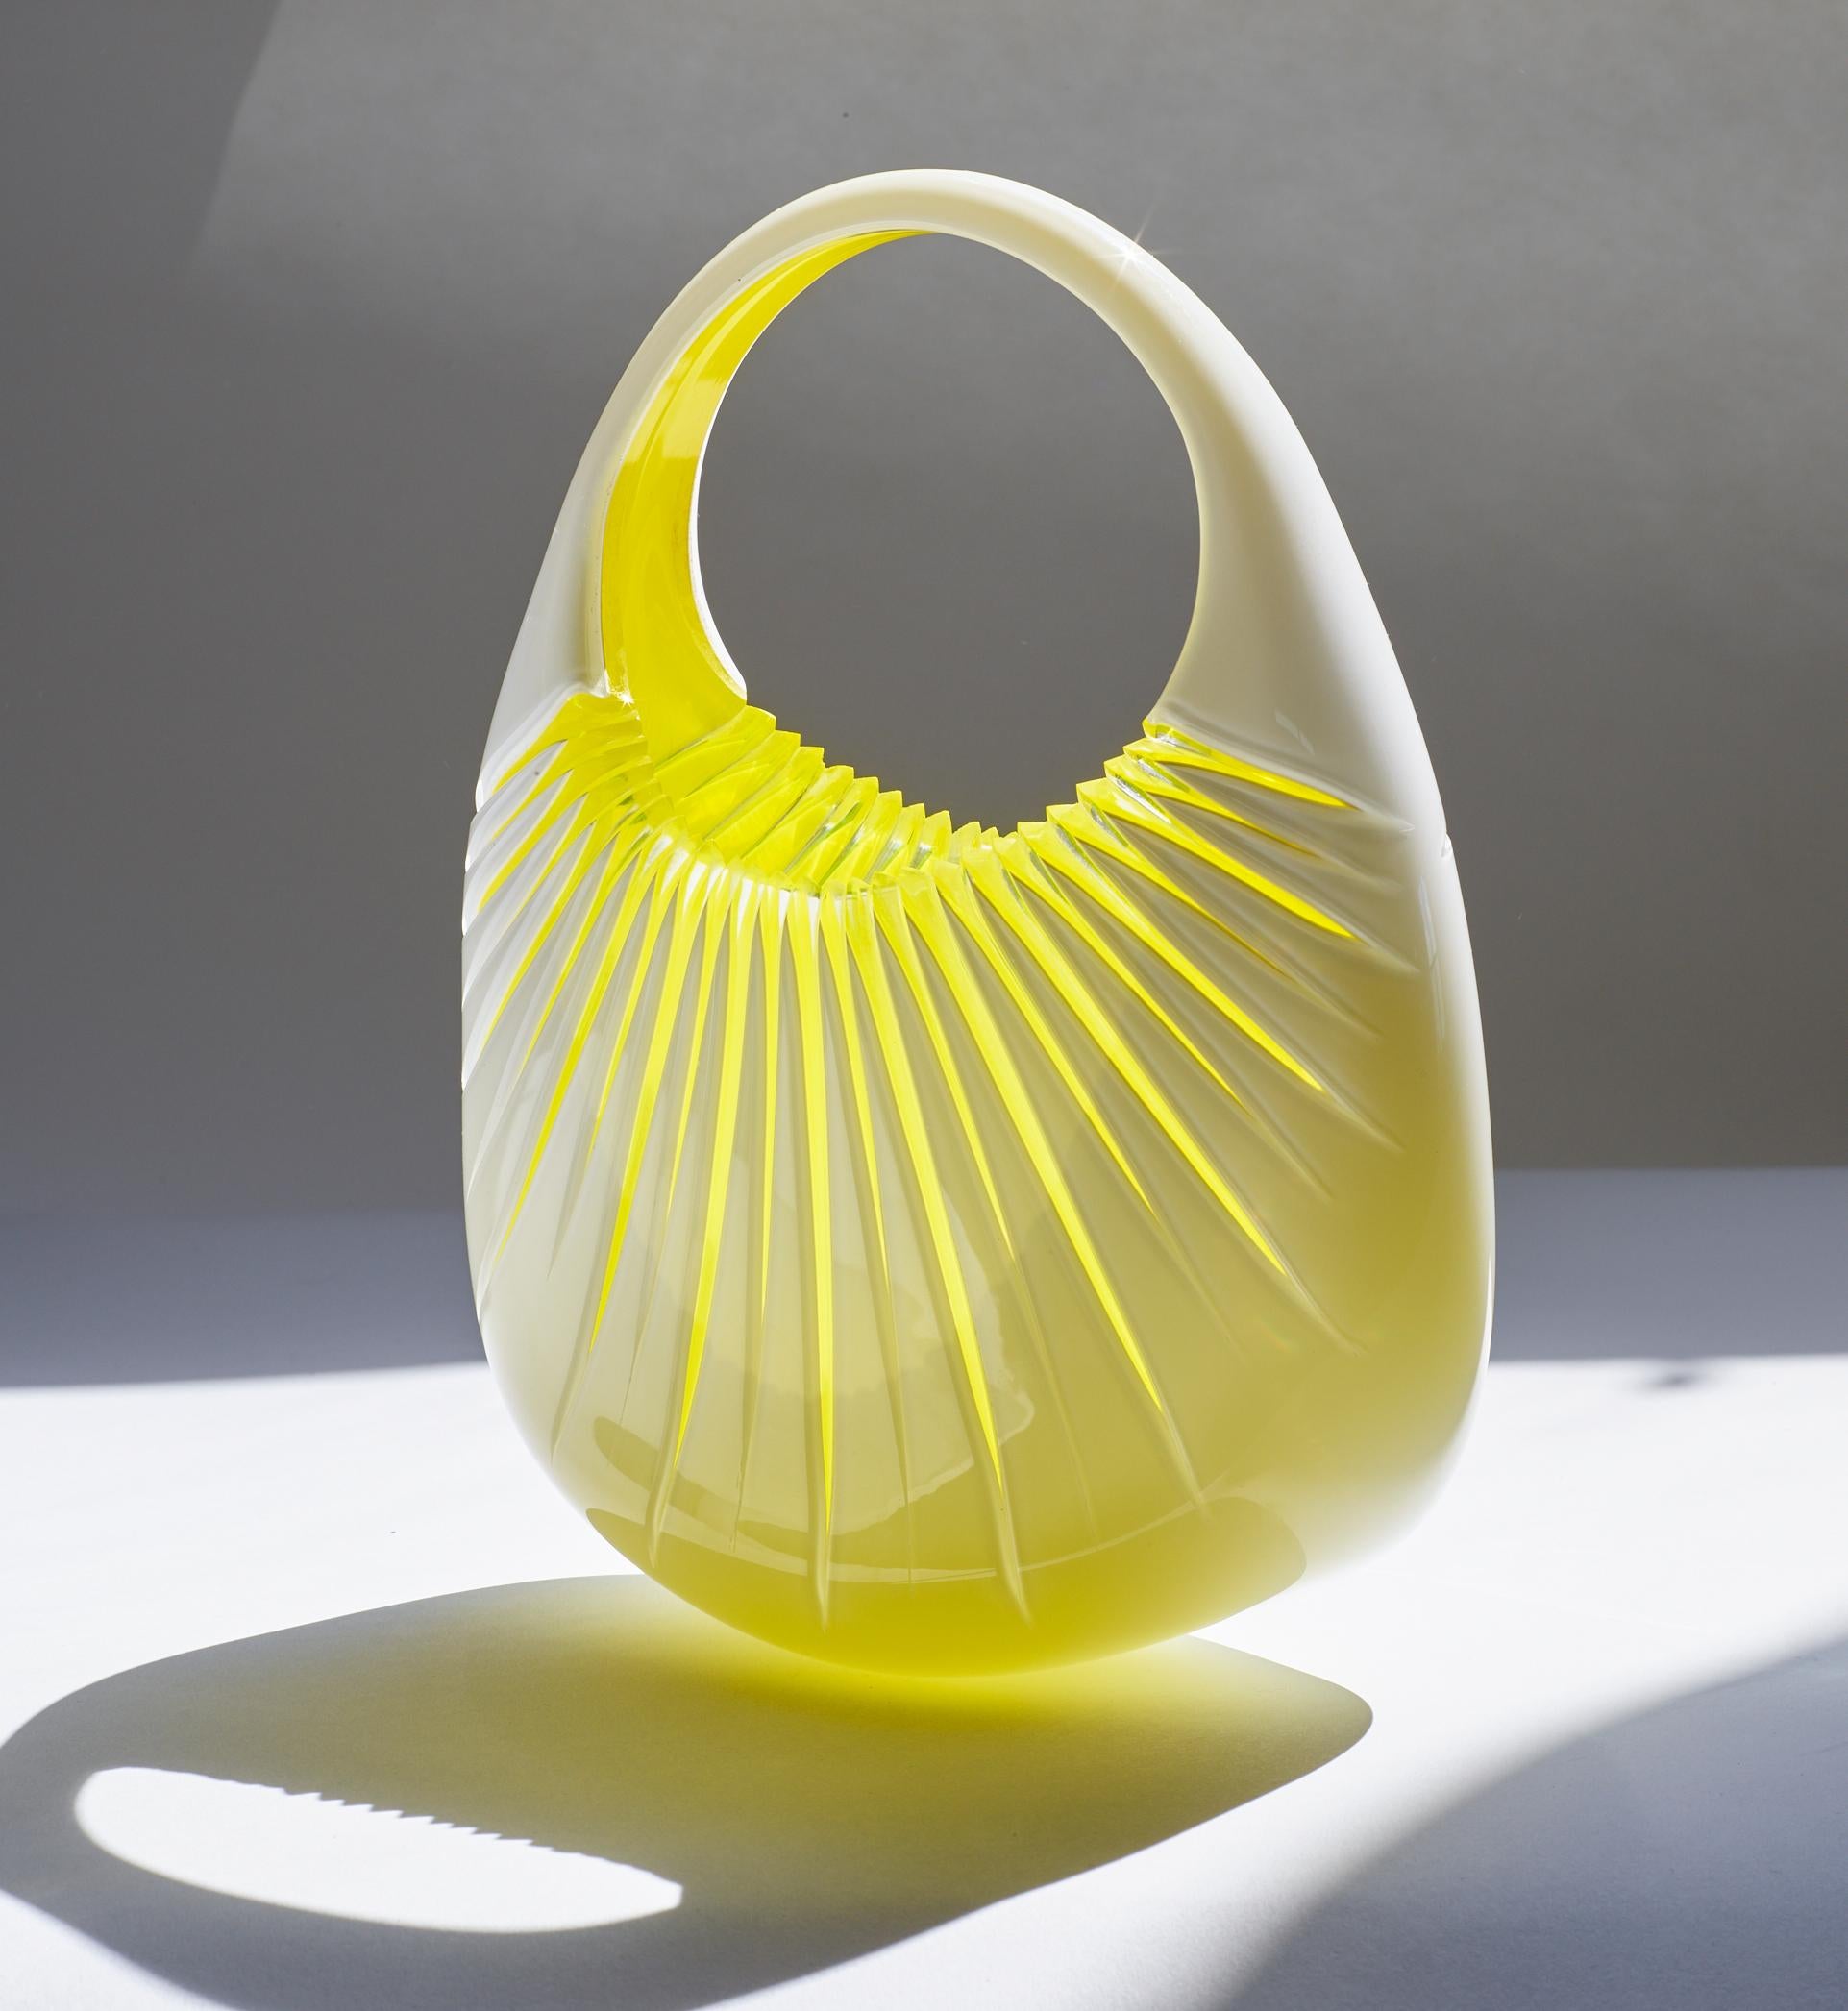 Other Glass Handbag with Yellow and White Engraved Sunburst by Raiffe